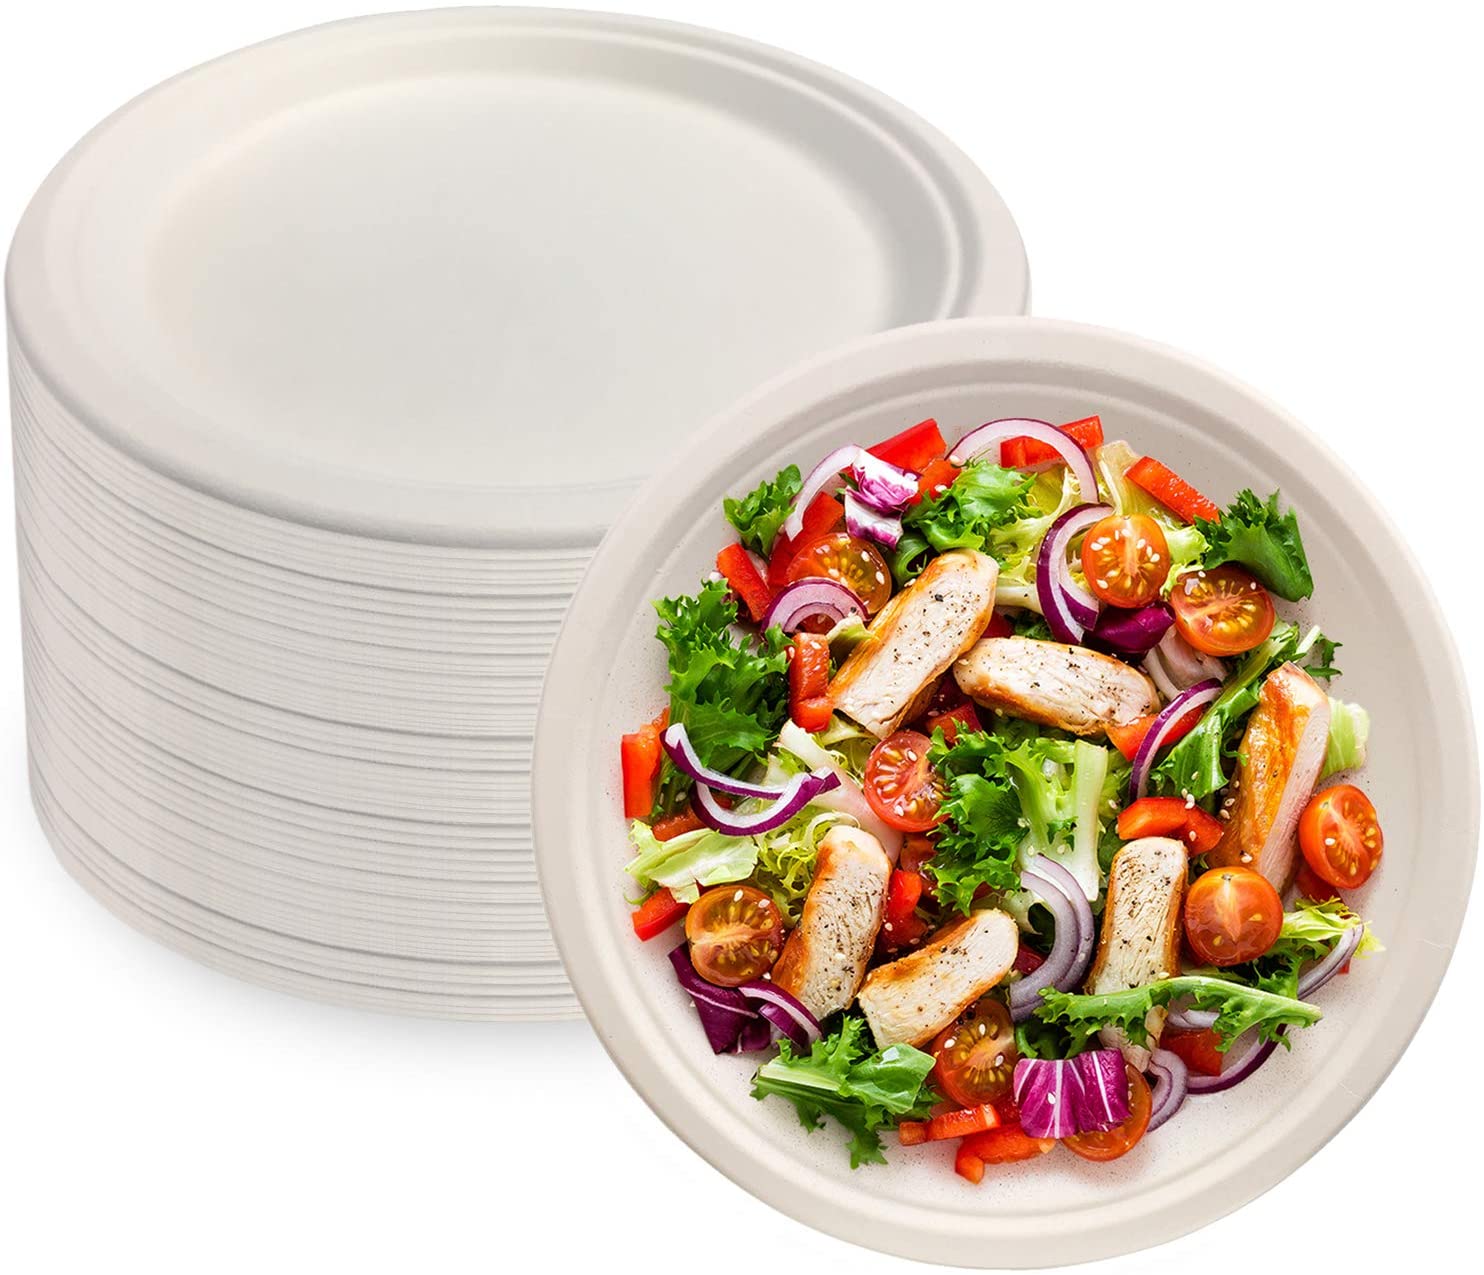 Heavy-duty Plates - Bagasse Plates Made Of Natural Sugarcane